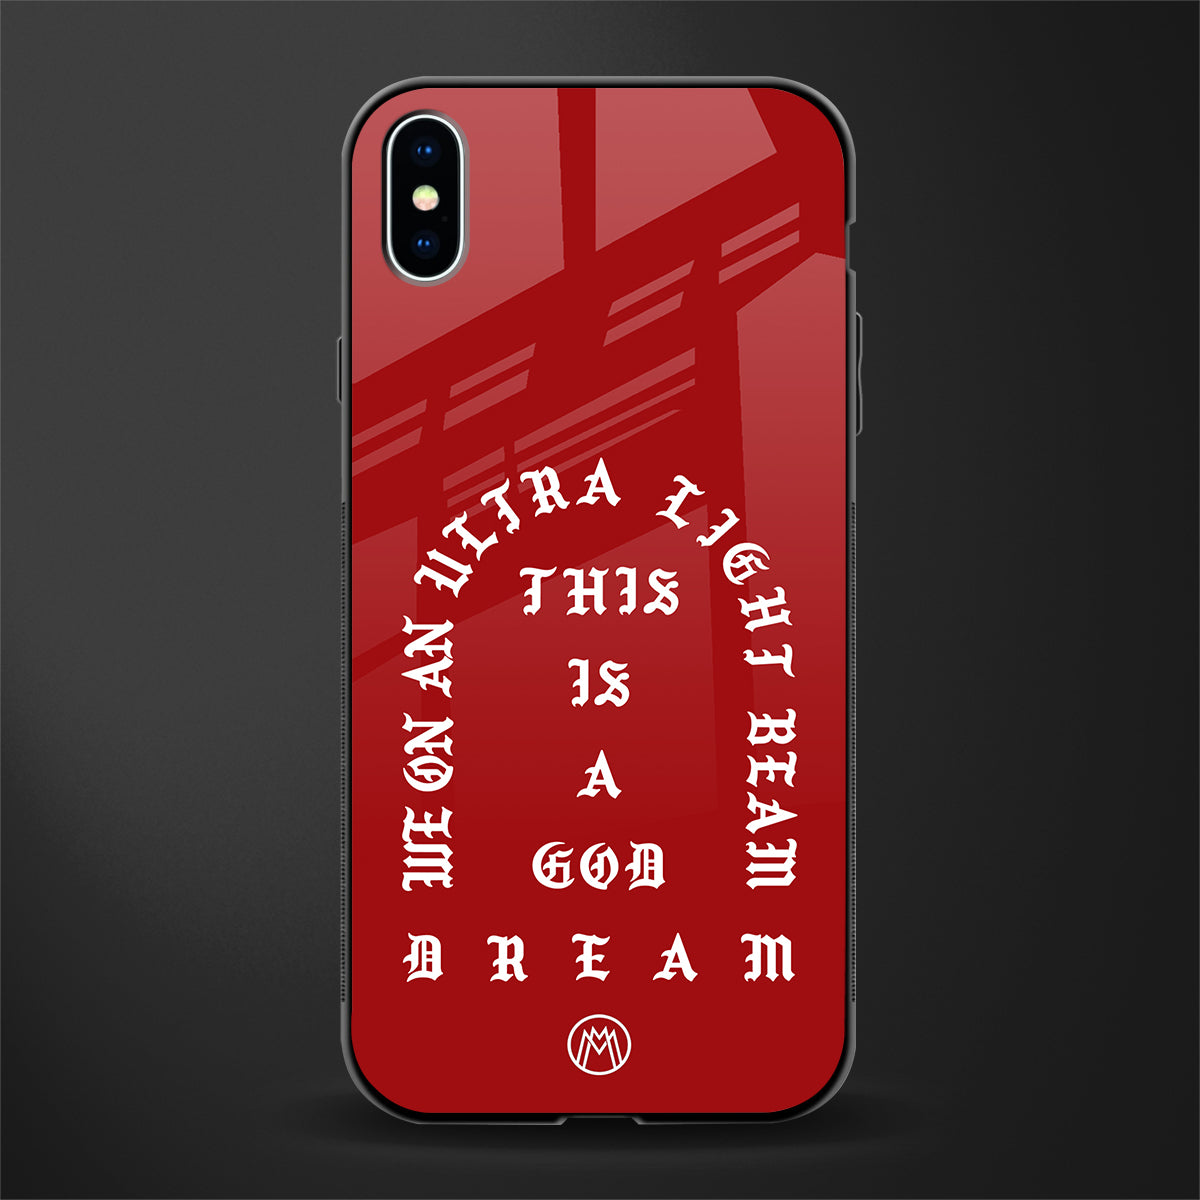 god dream glass case for iphone xs max image